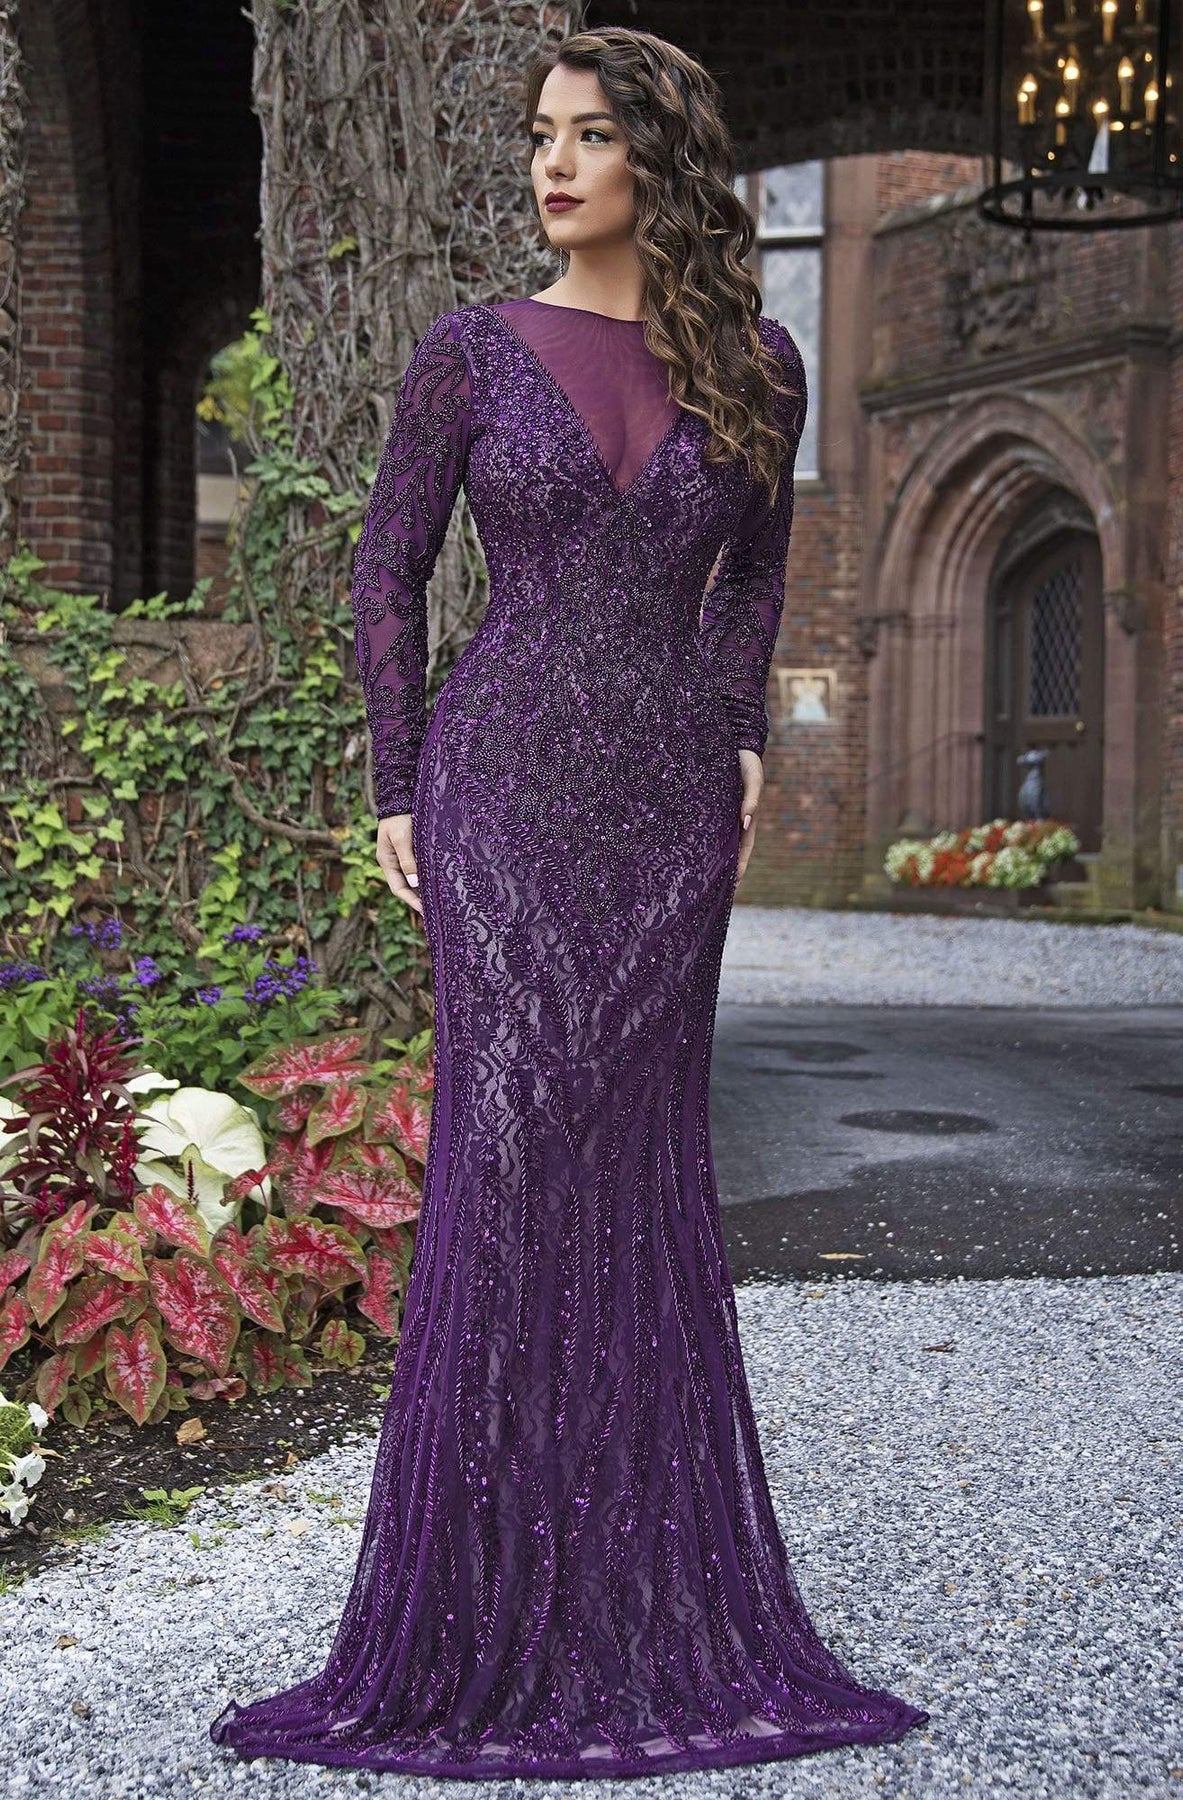 Primavera Couture - 3192 Sequined Long Sleeves Sheath Gown Special Occasion Dress 2 / Amethyst